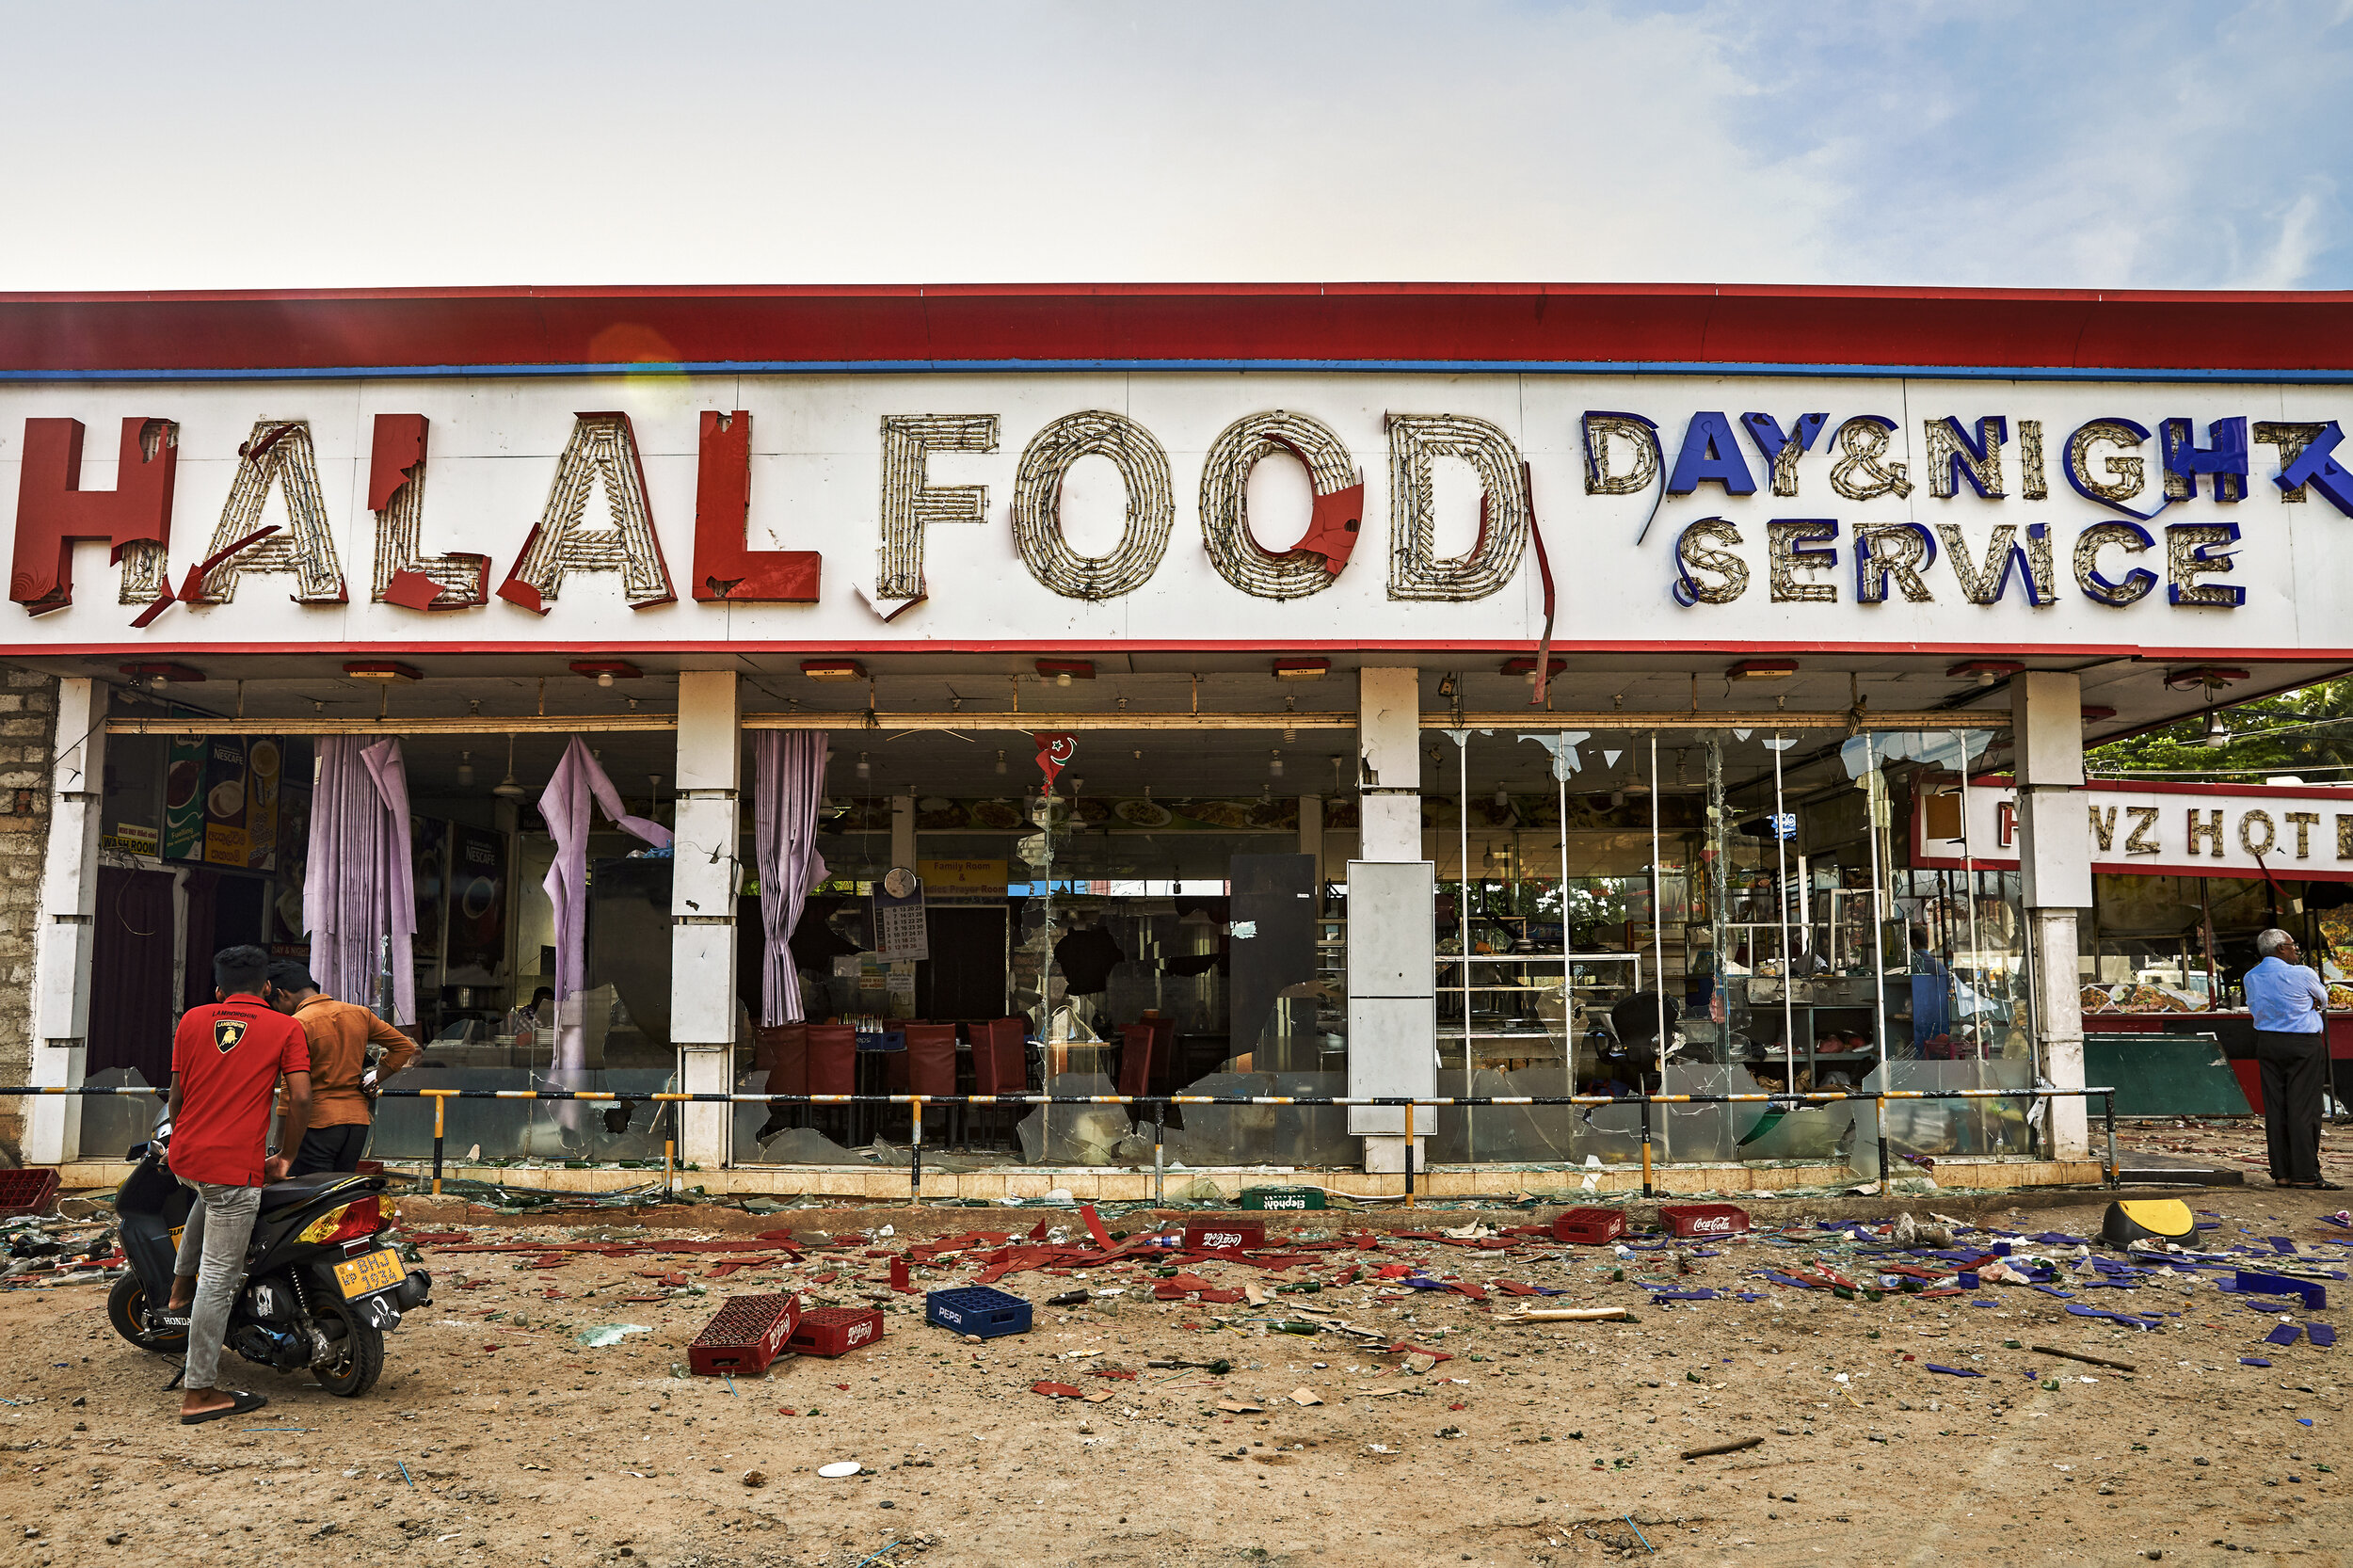  Rioters destroyed this Muslim owned halal restaurant which had been a staple within the community for over 20 years  